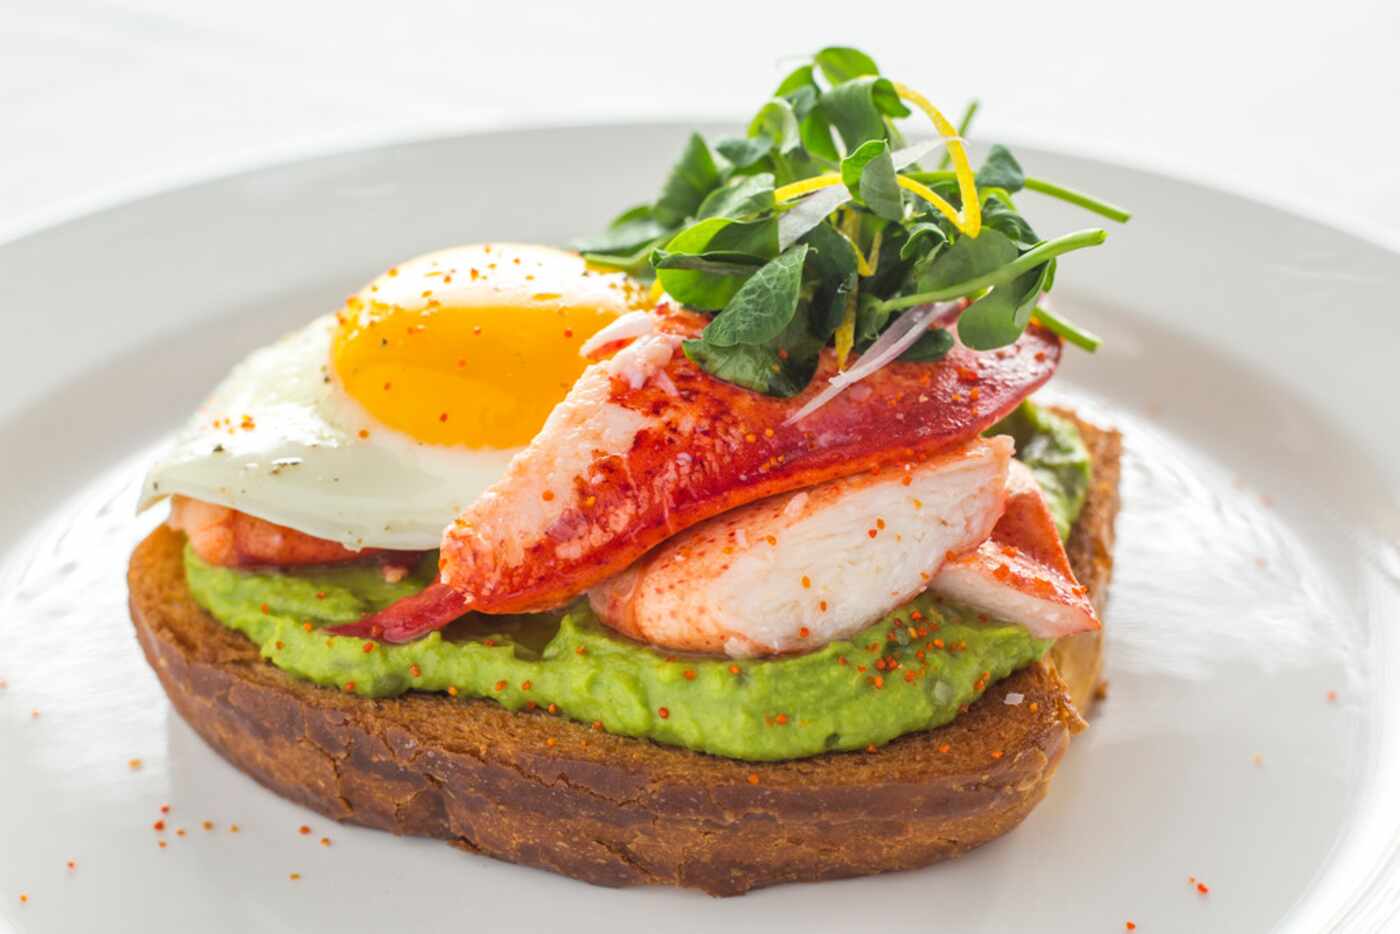 On Father's Day, Ocean Prime will offer lobster toast for $24 with sunny side egg, avocado,...